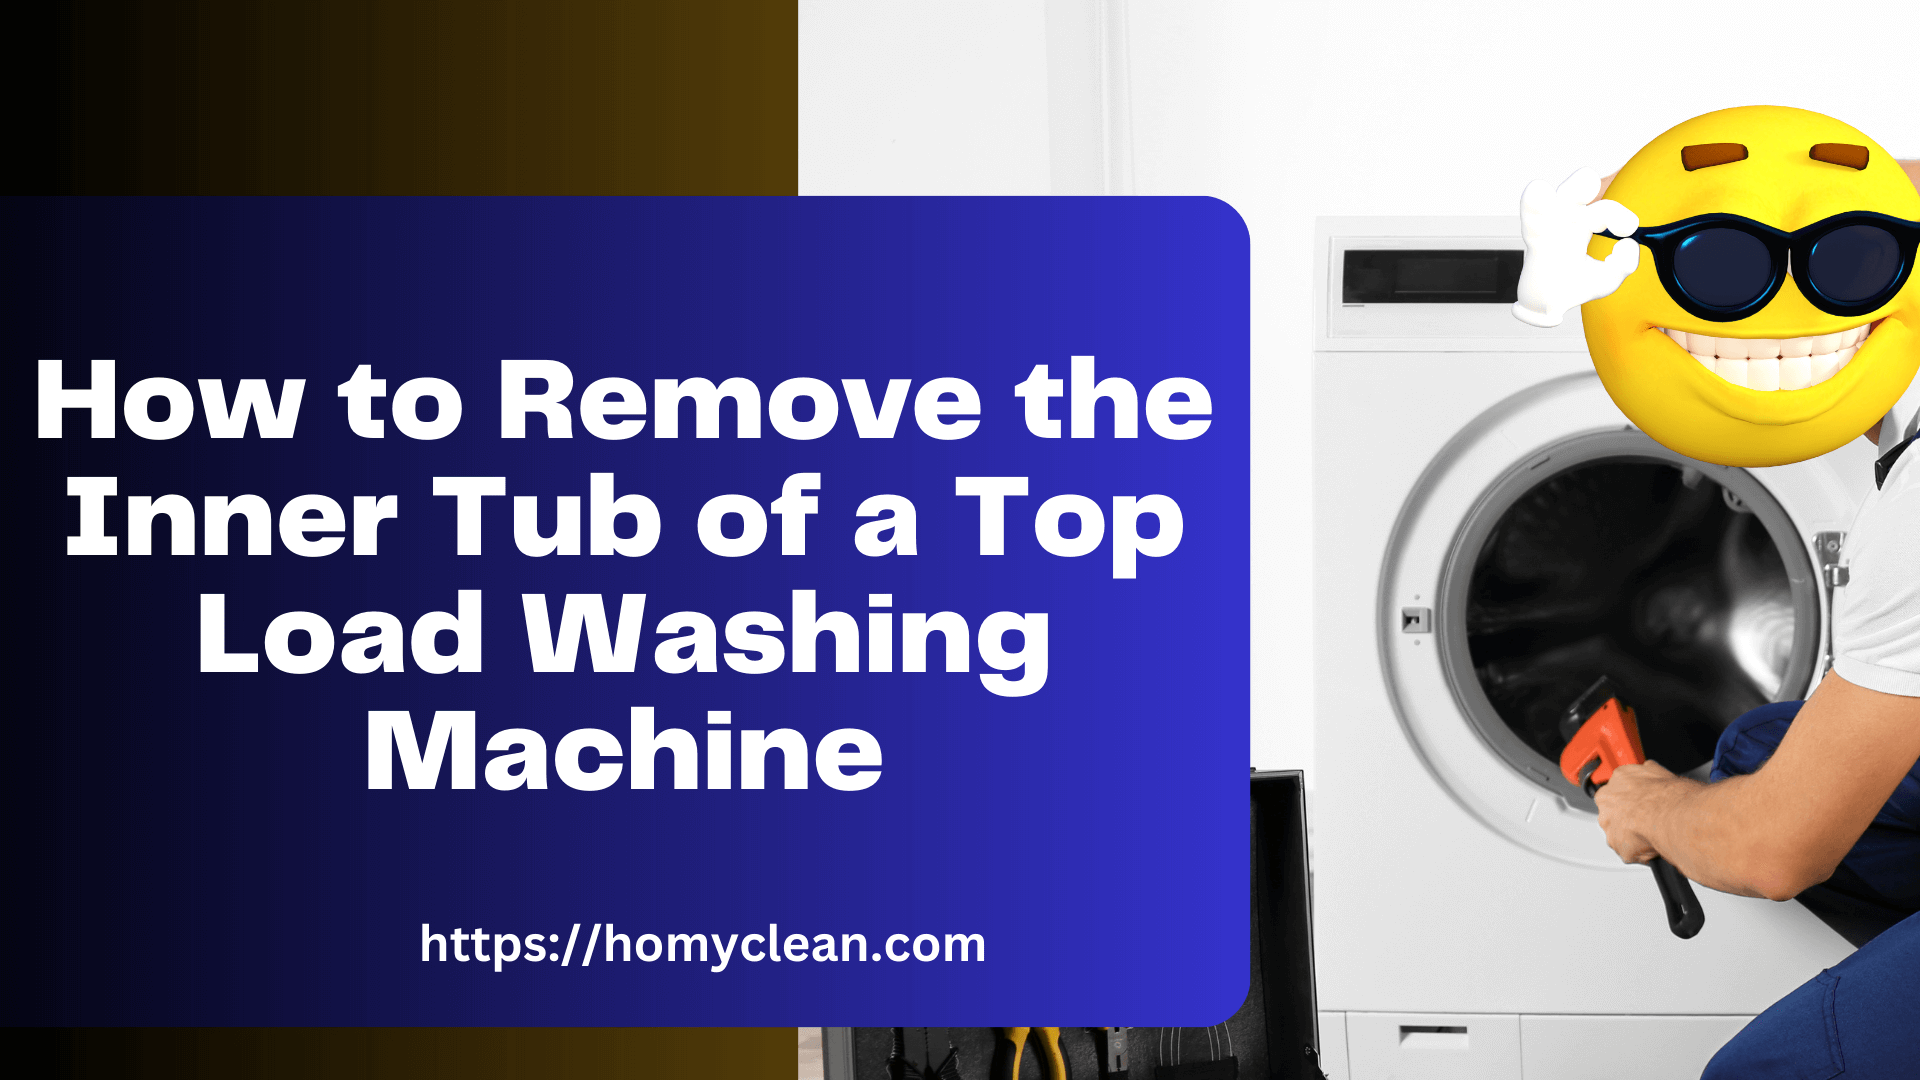 How to Remove the Inner Tub of a Top Load Washing Machine – Ans By Expert